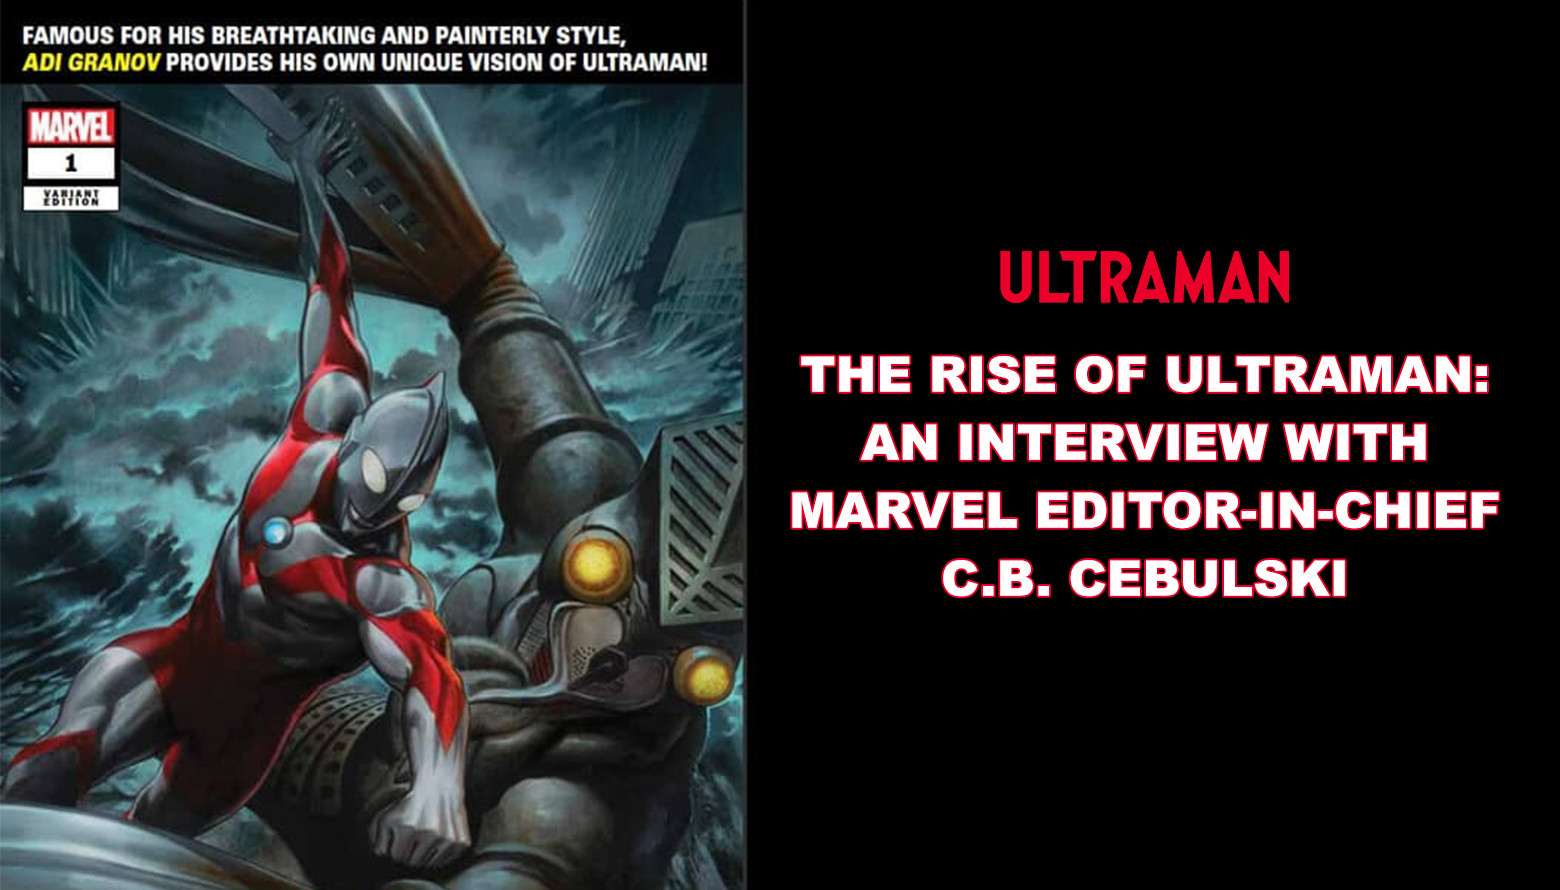 THE RISE OF ULTRAMAN:AN INTERVIEW WITH  MARVEL EDITOR-IN-CHIEF C.B. CEBULSKI